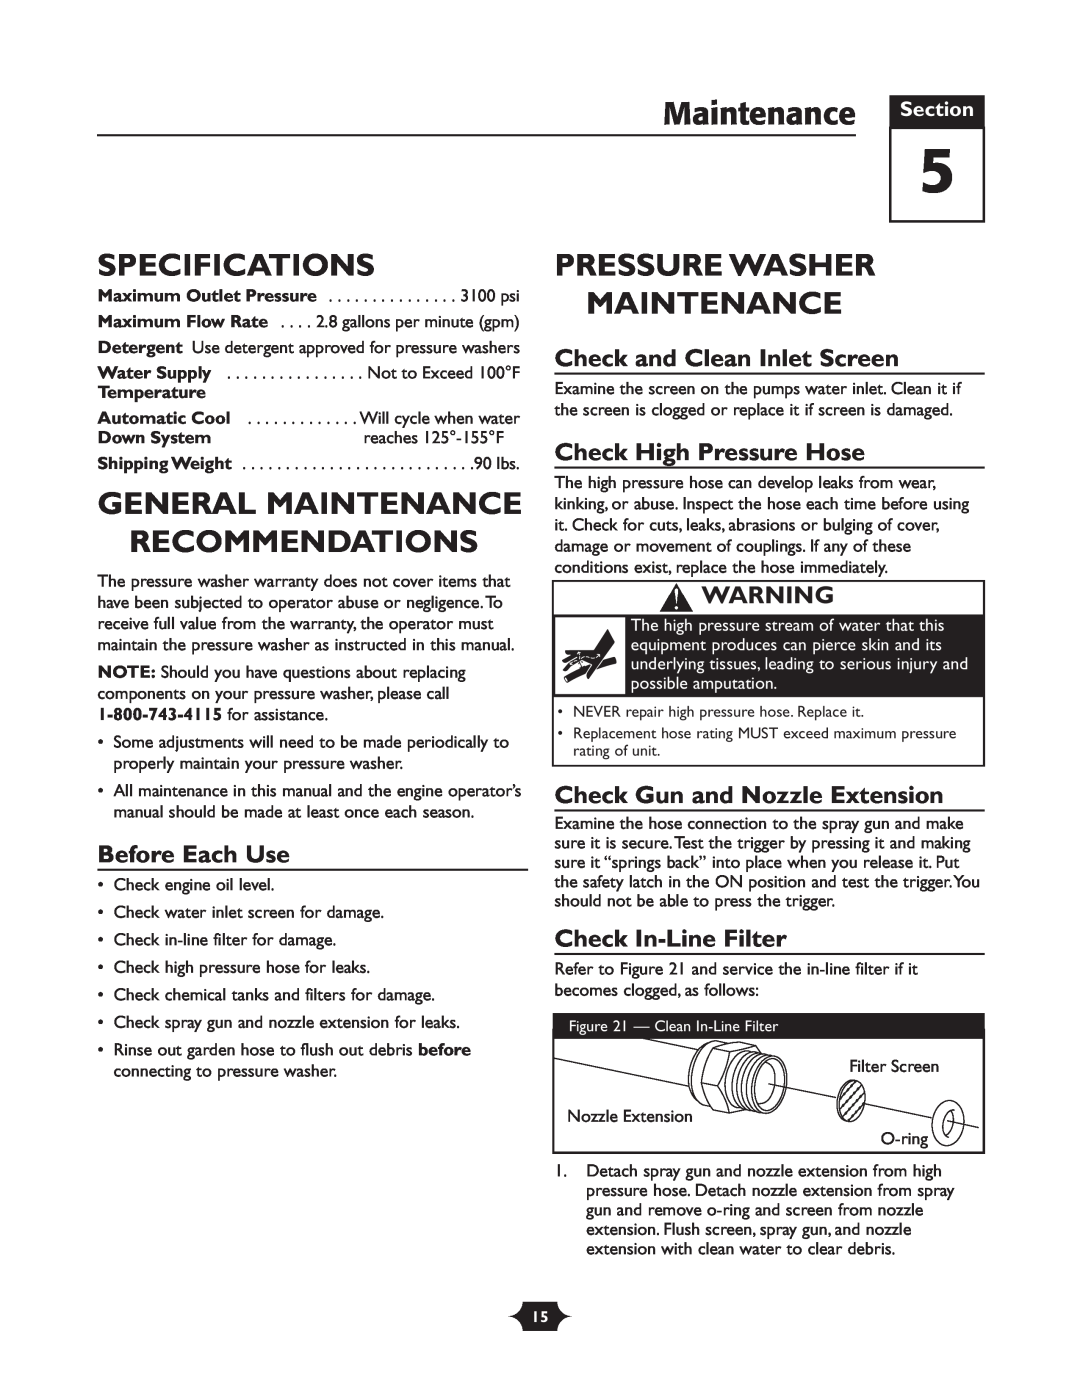 Briggs & Stratton 20263 manual Maintenance Section, Specifications, General Maintenance Recommendations, Before Each Use 